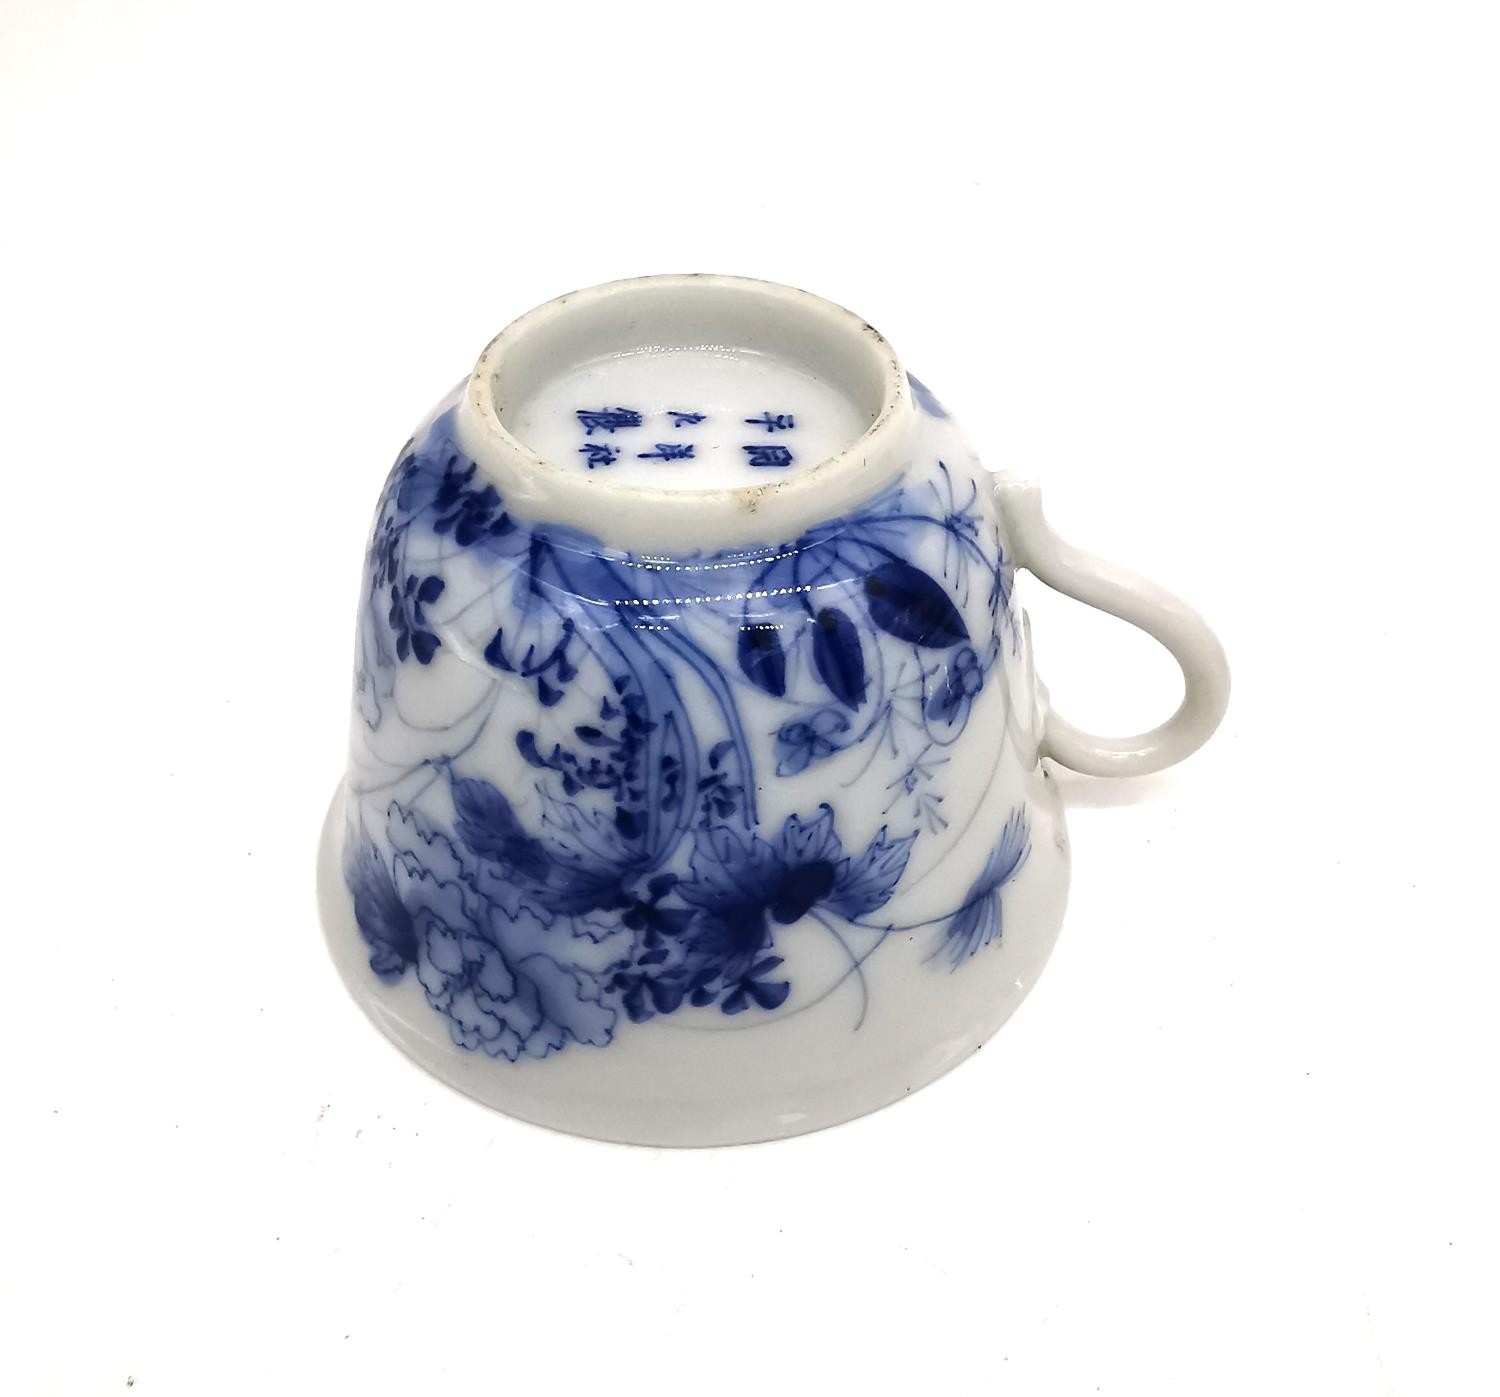 A Japanese 19th century hand painted porcelain small blue and white floral and foliate design teacup - Image 5 of 9